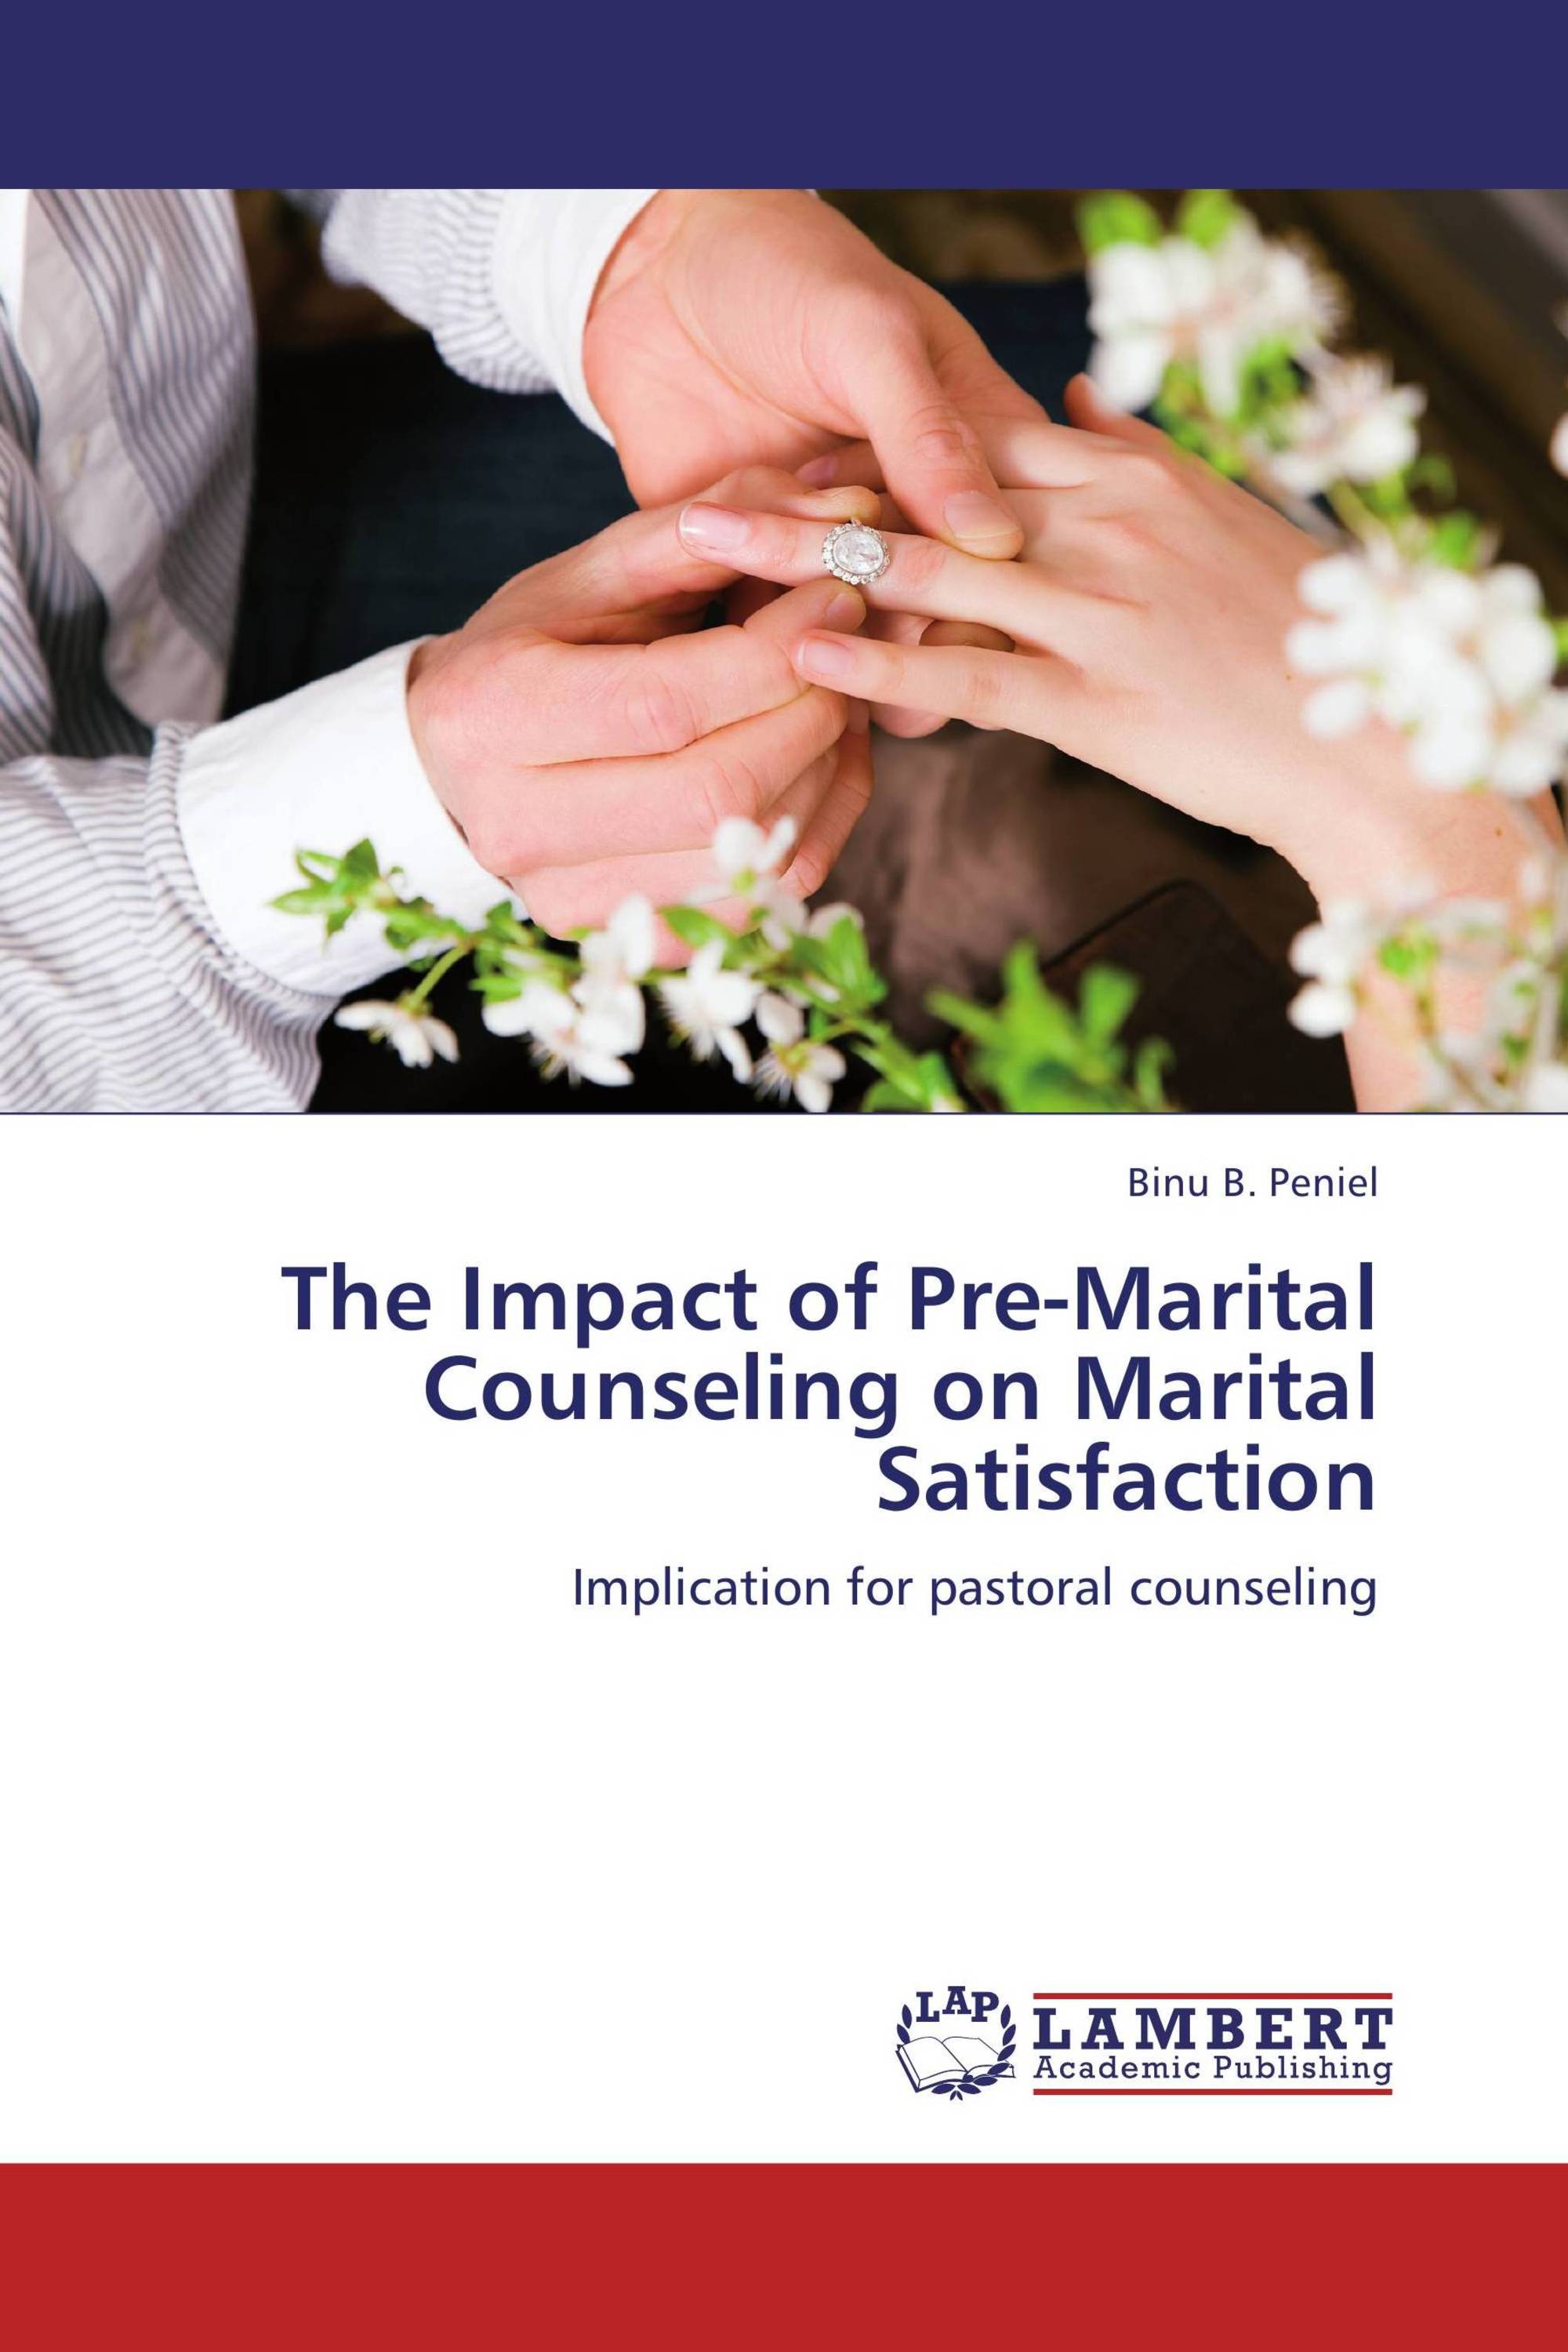 marital counselling case study